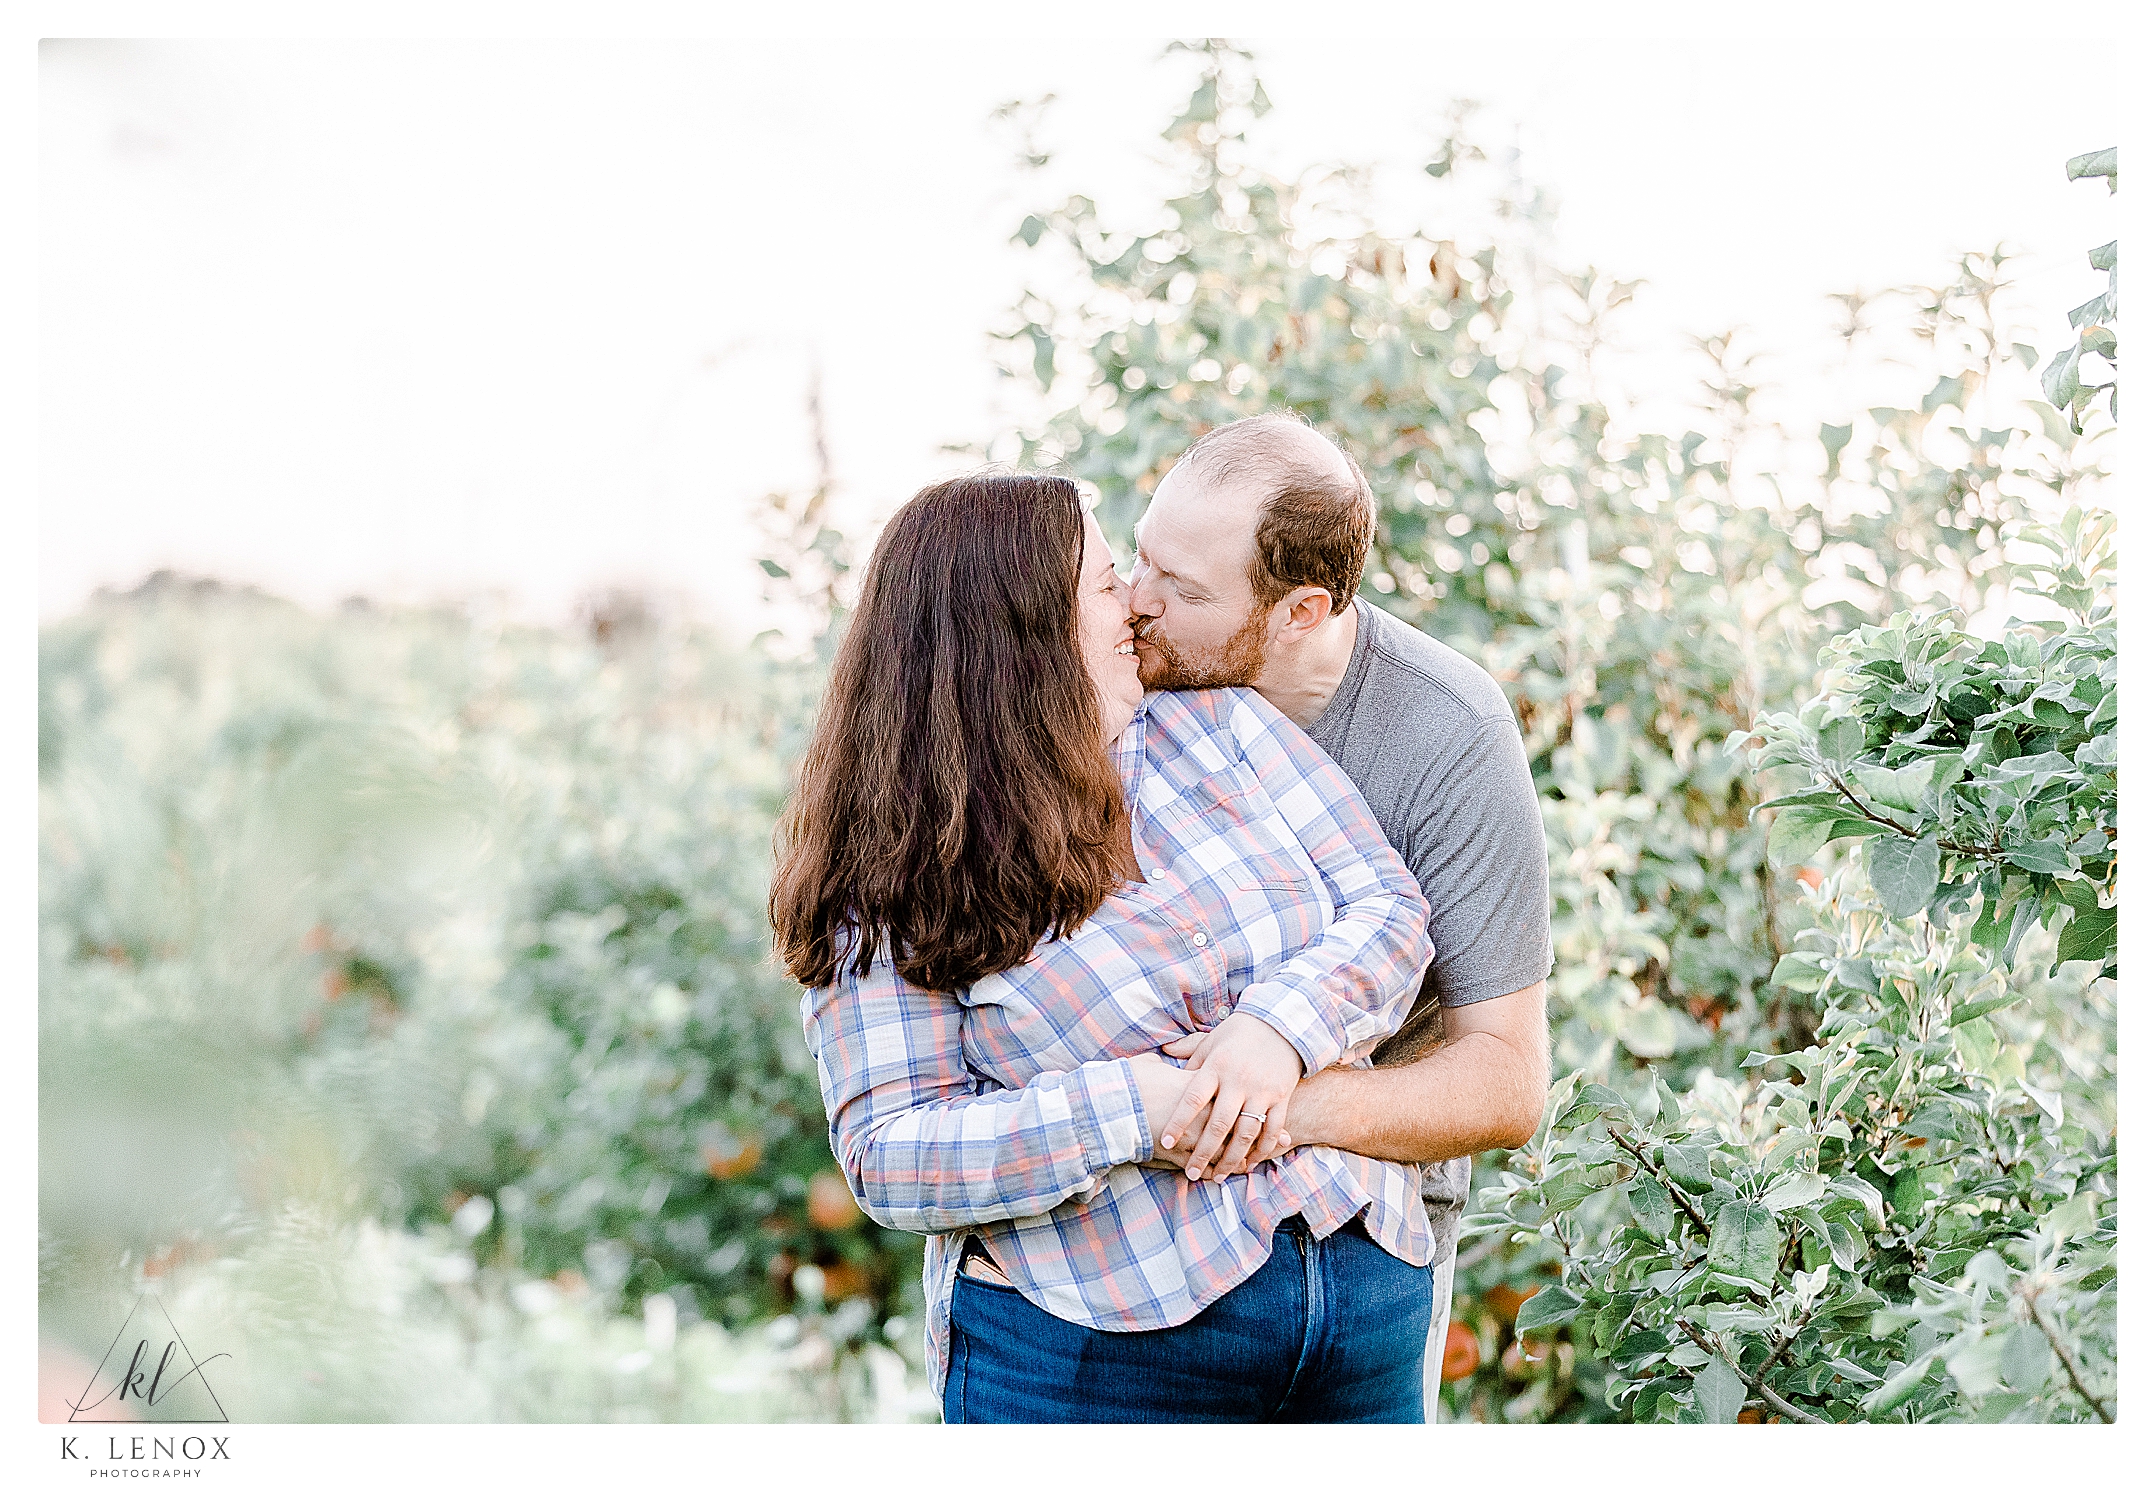 Engagement Session at Alyson's Orchard